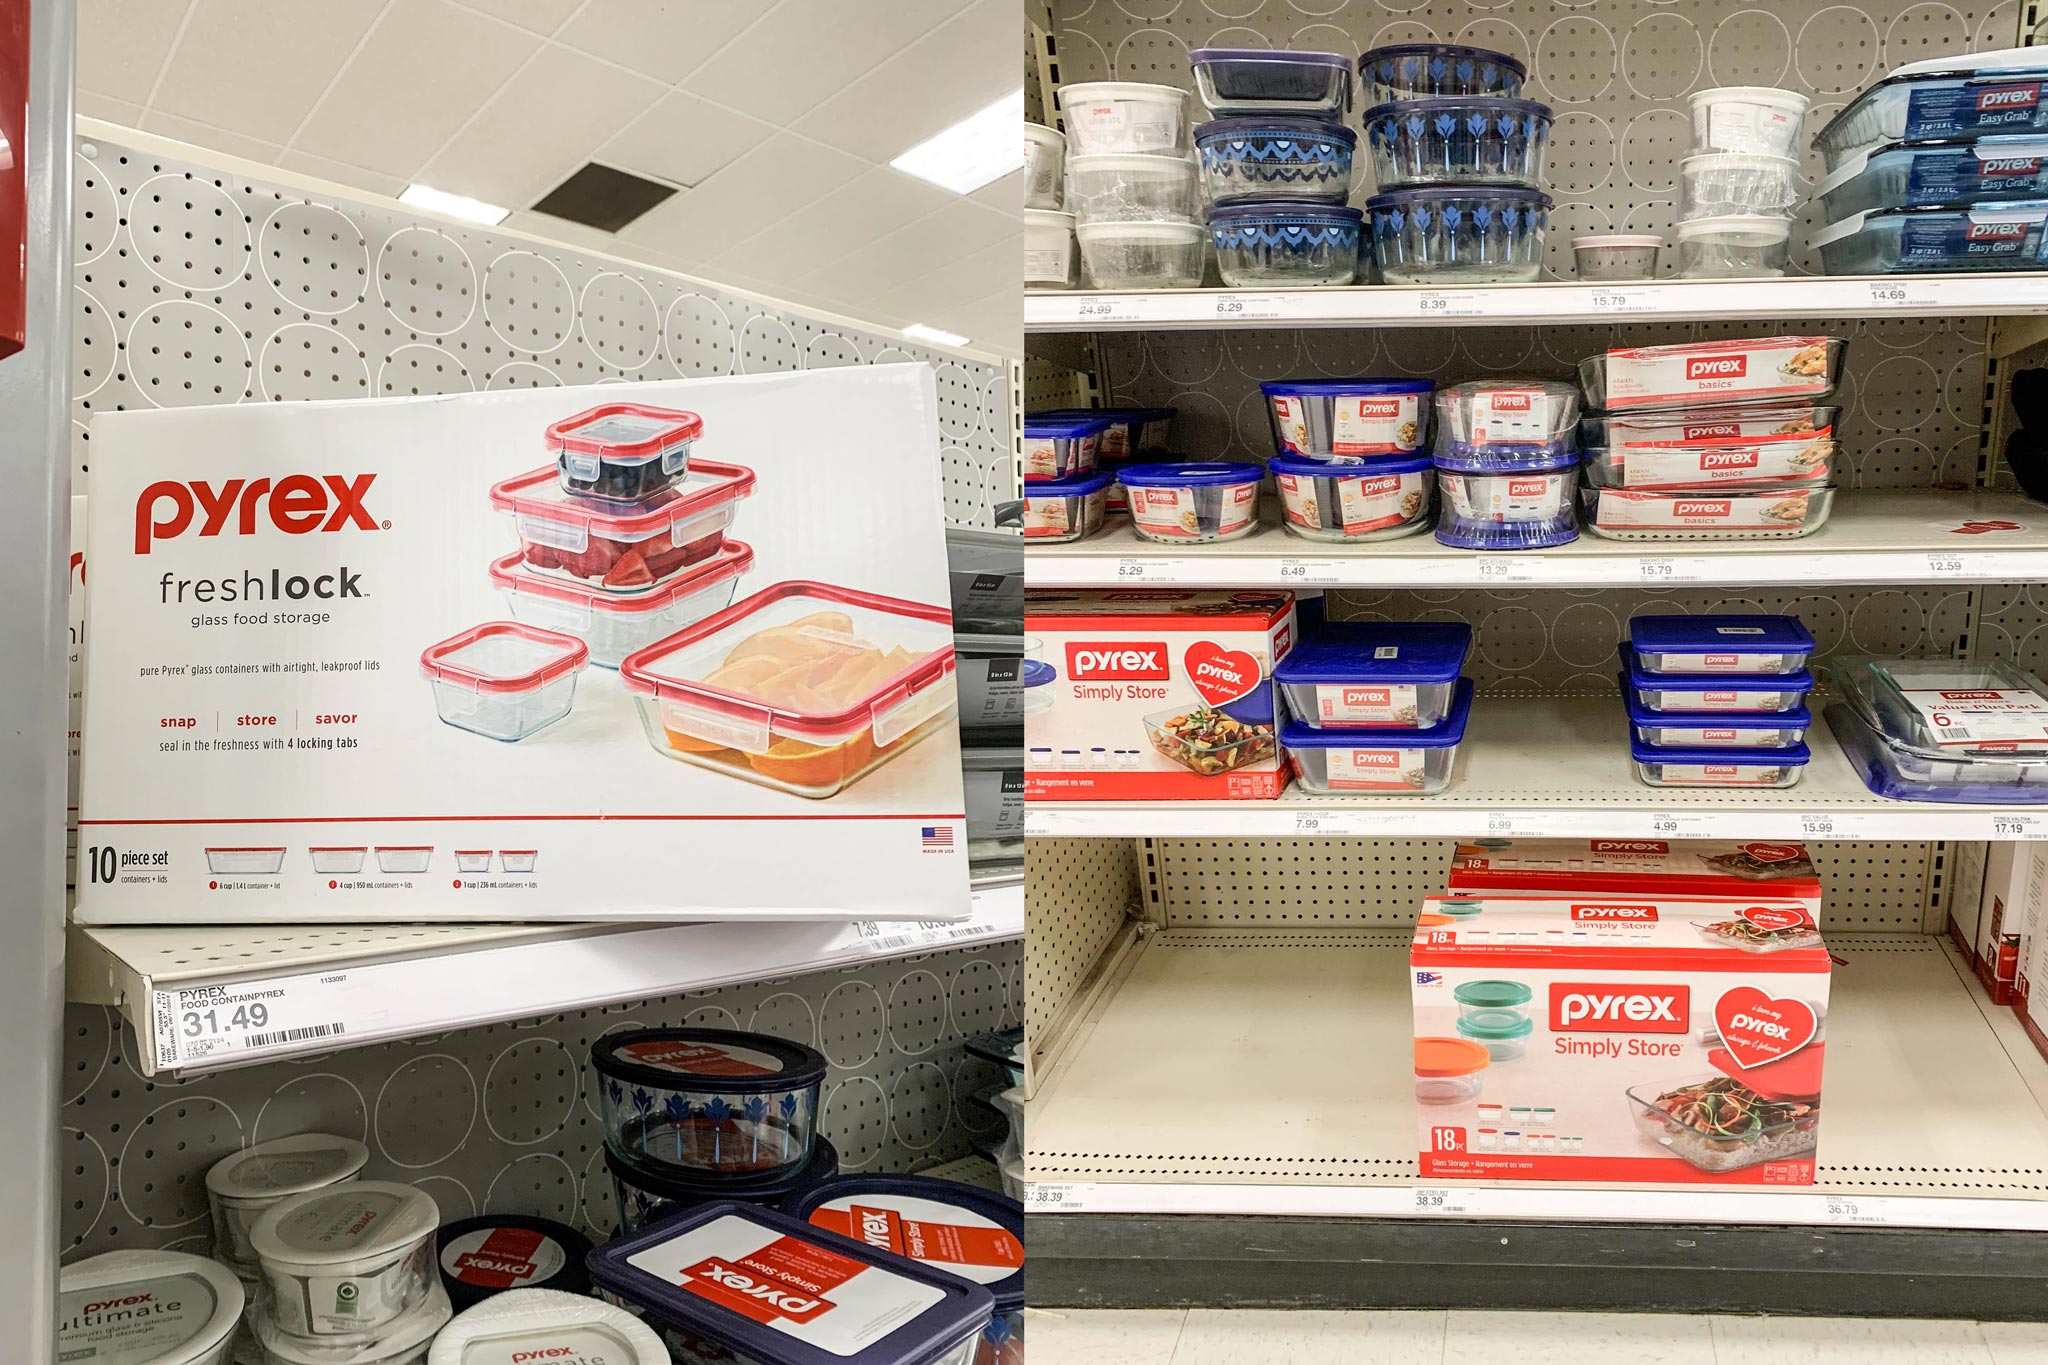 Some Pyrex containers available at my local Target.